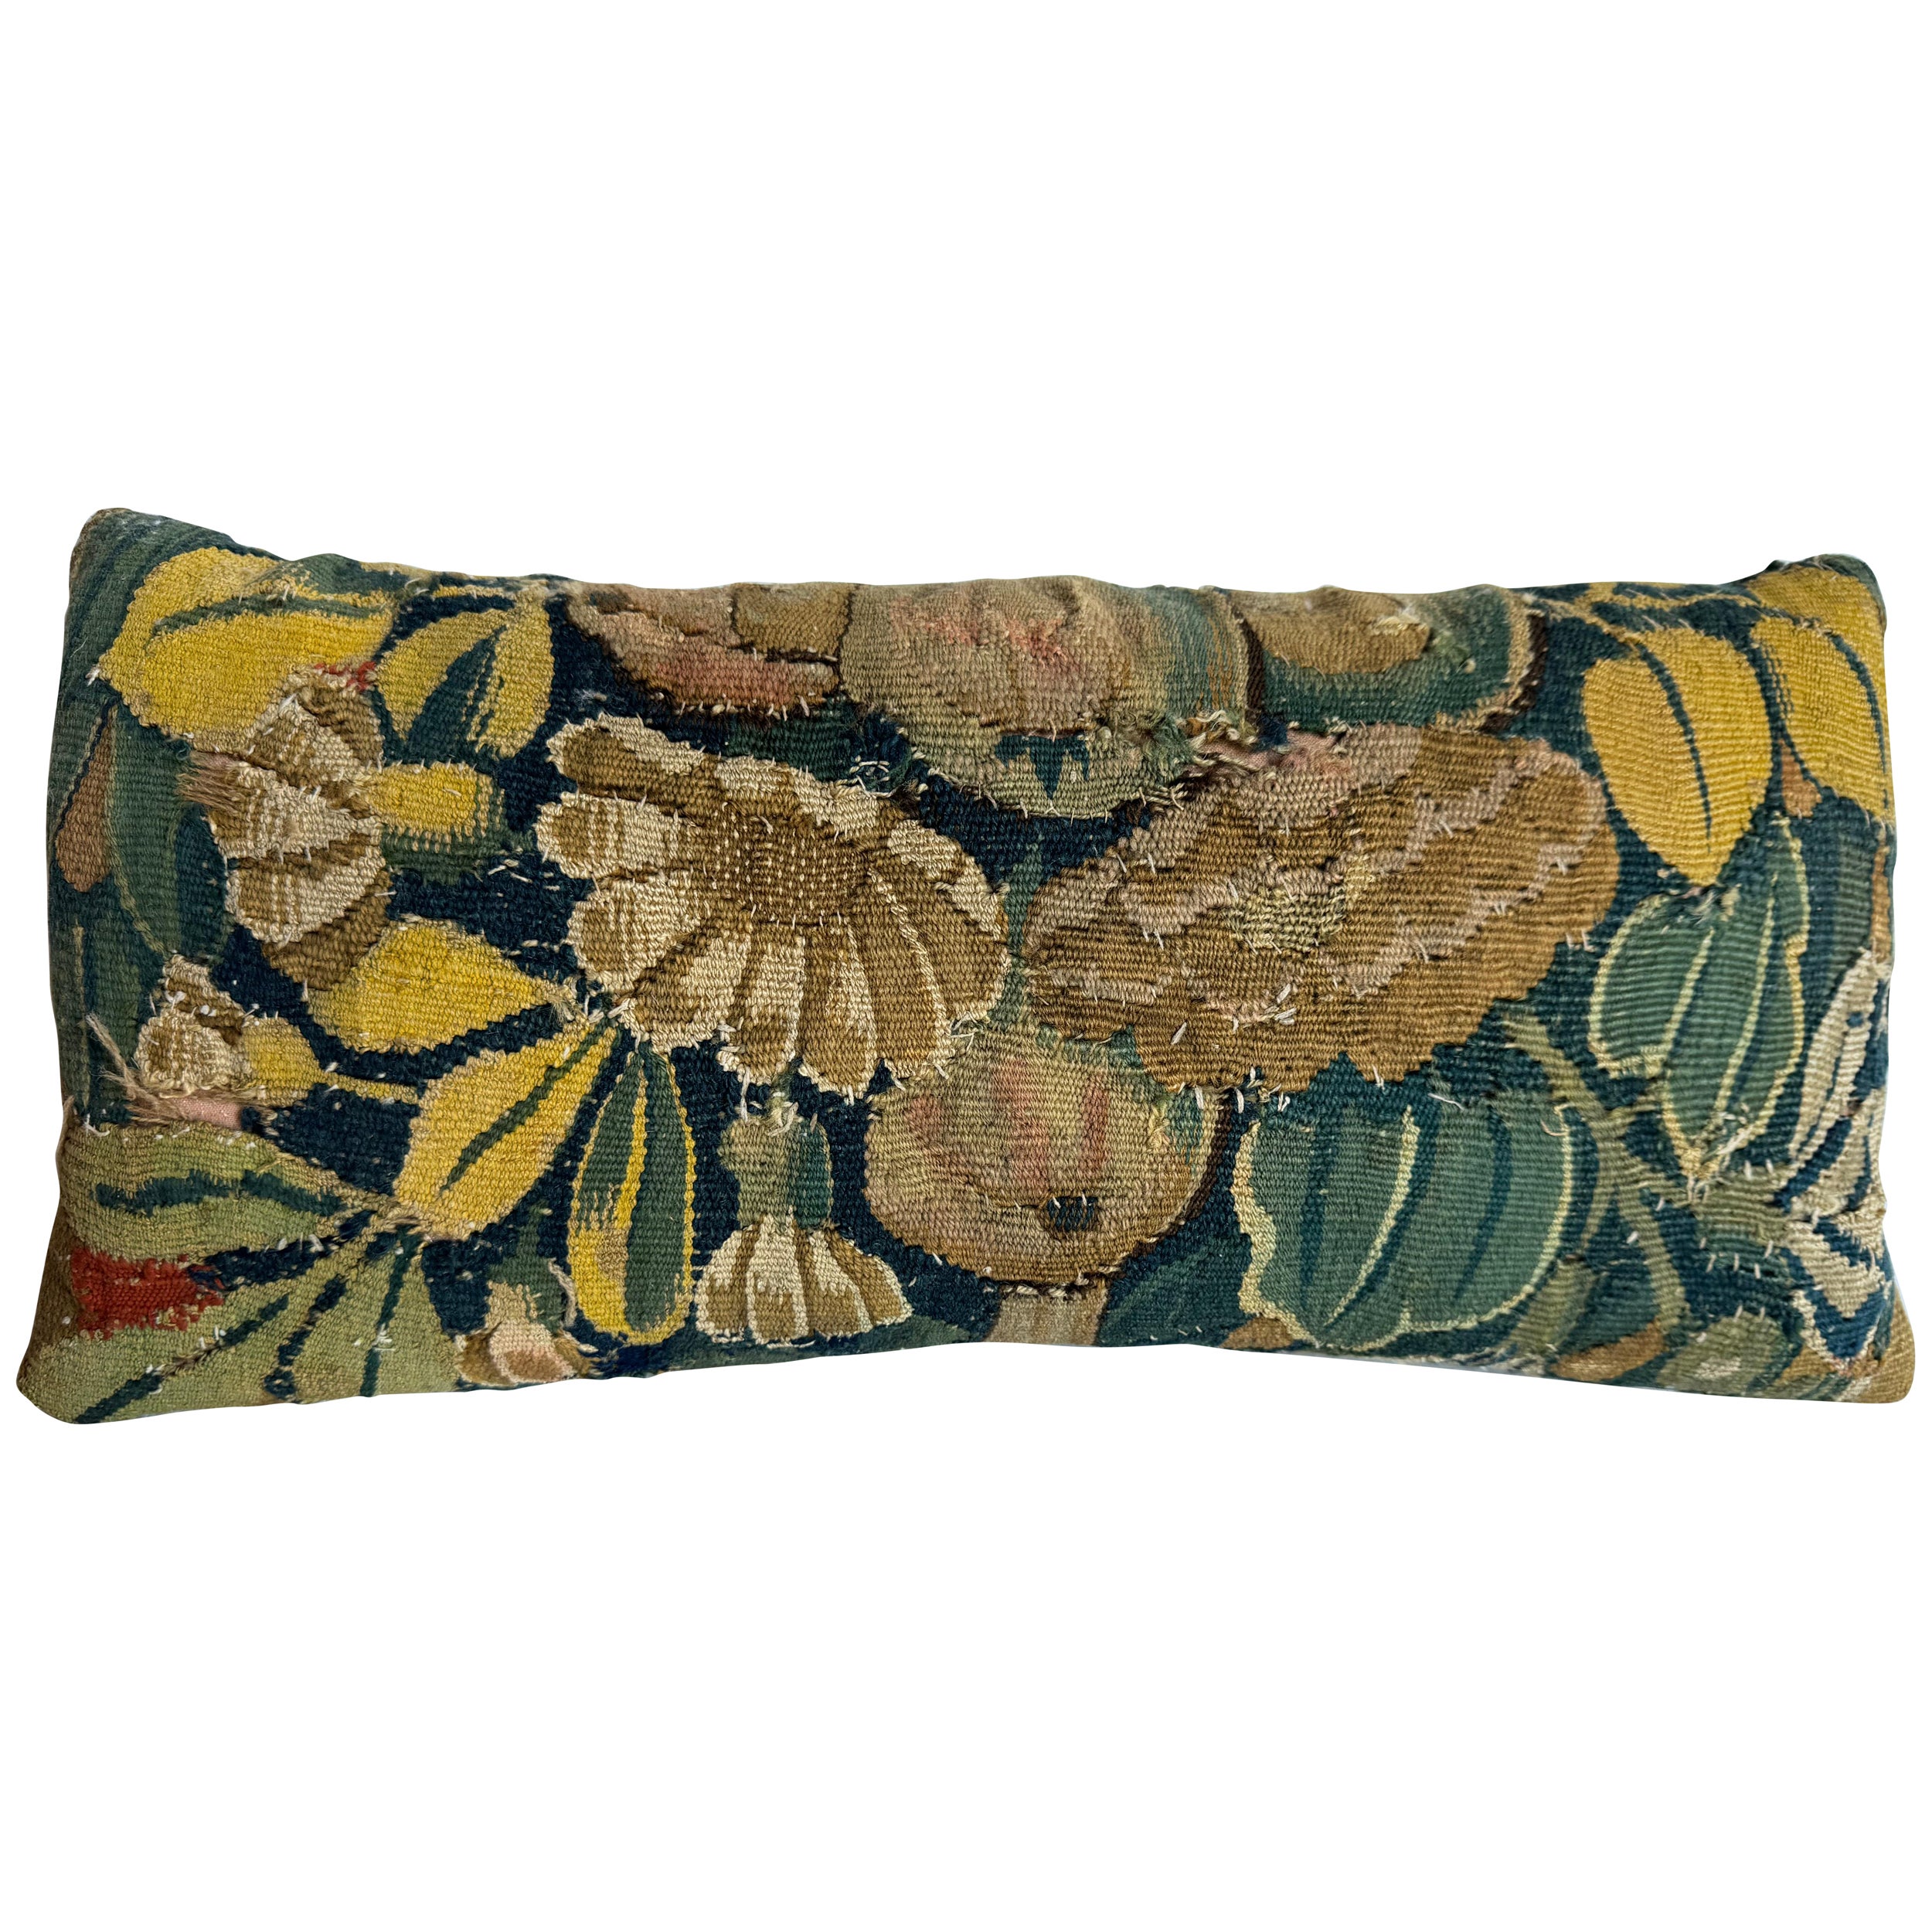  Brussels 16th Century Pillow - 19"x9" For Sale